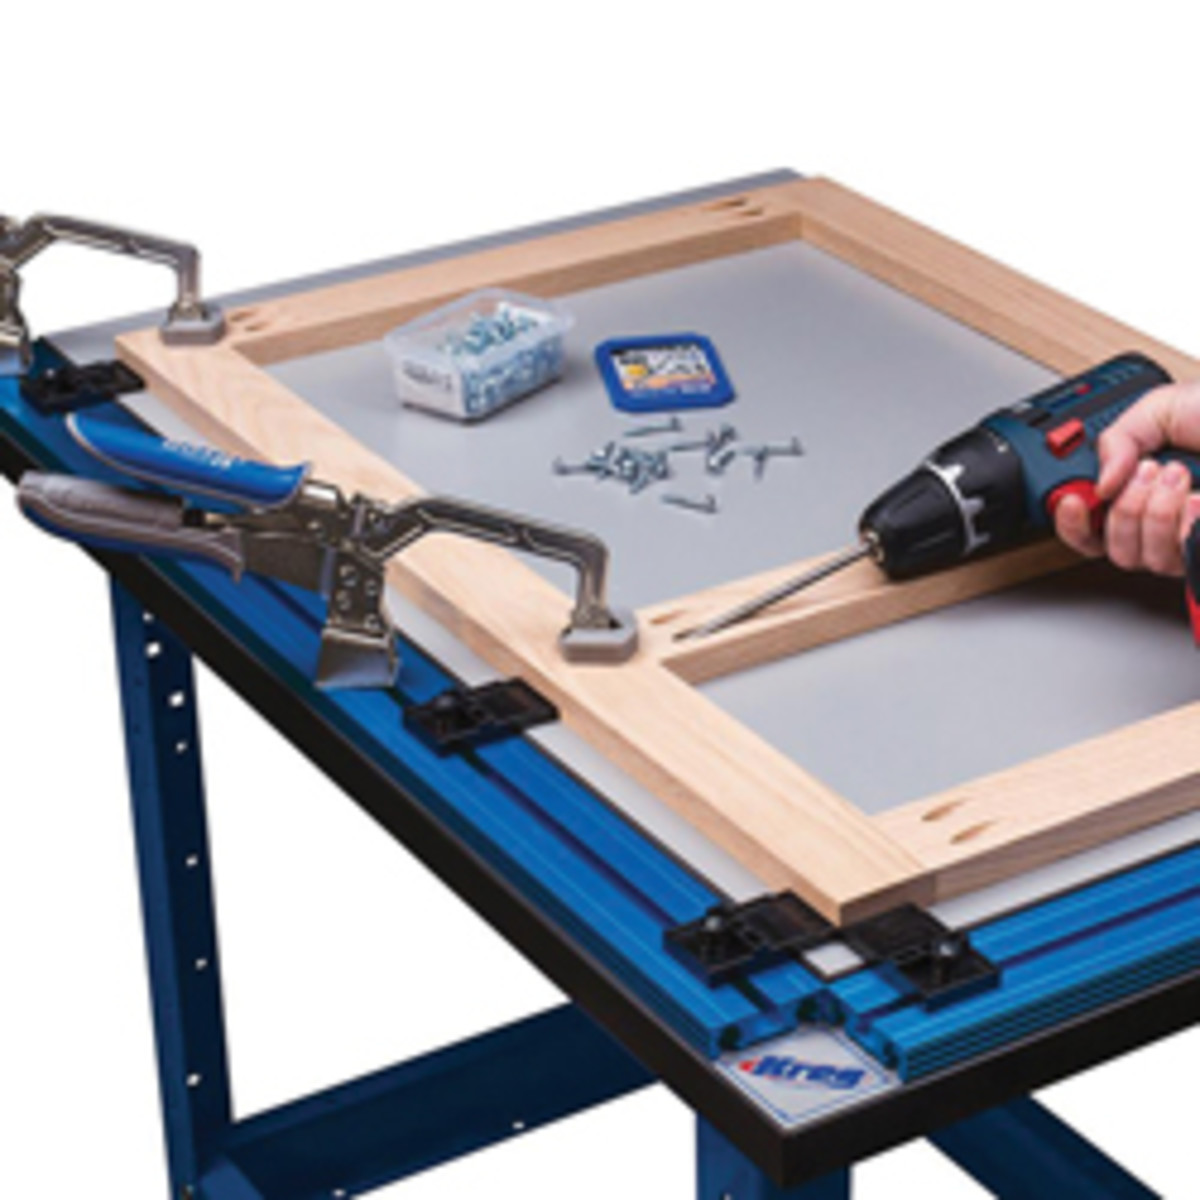 Kreg’s new clamping table holds stiles and rails or other parts at a true 90 degrees for pocket-hole drilling and other operations.